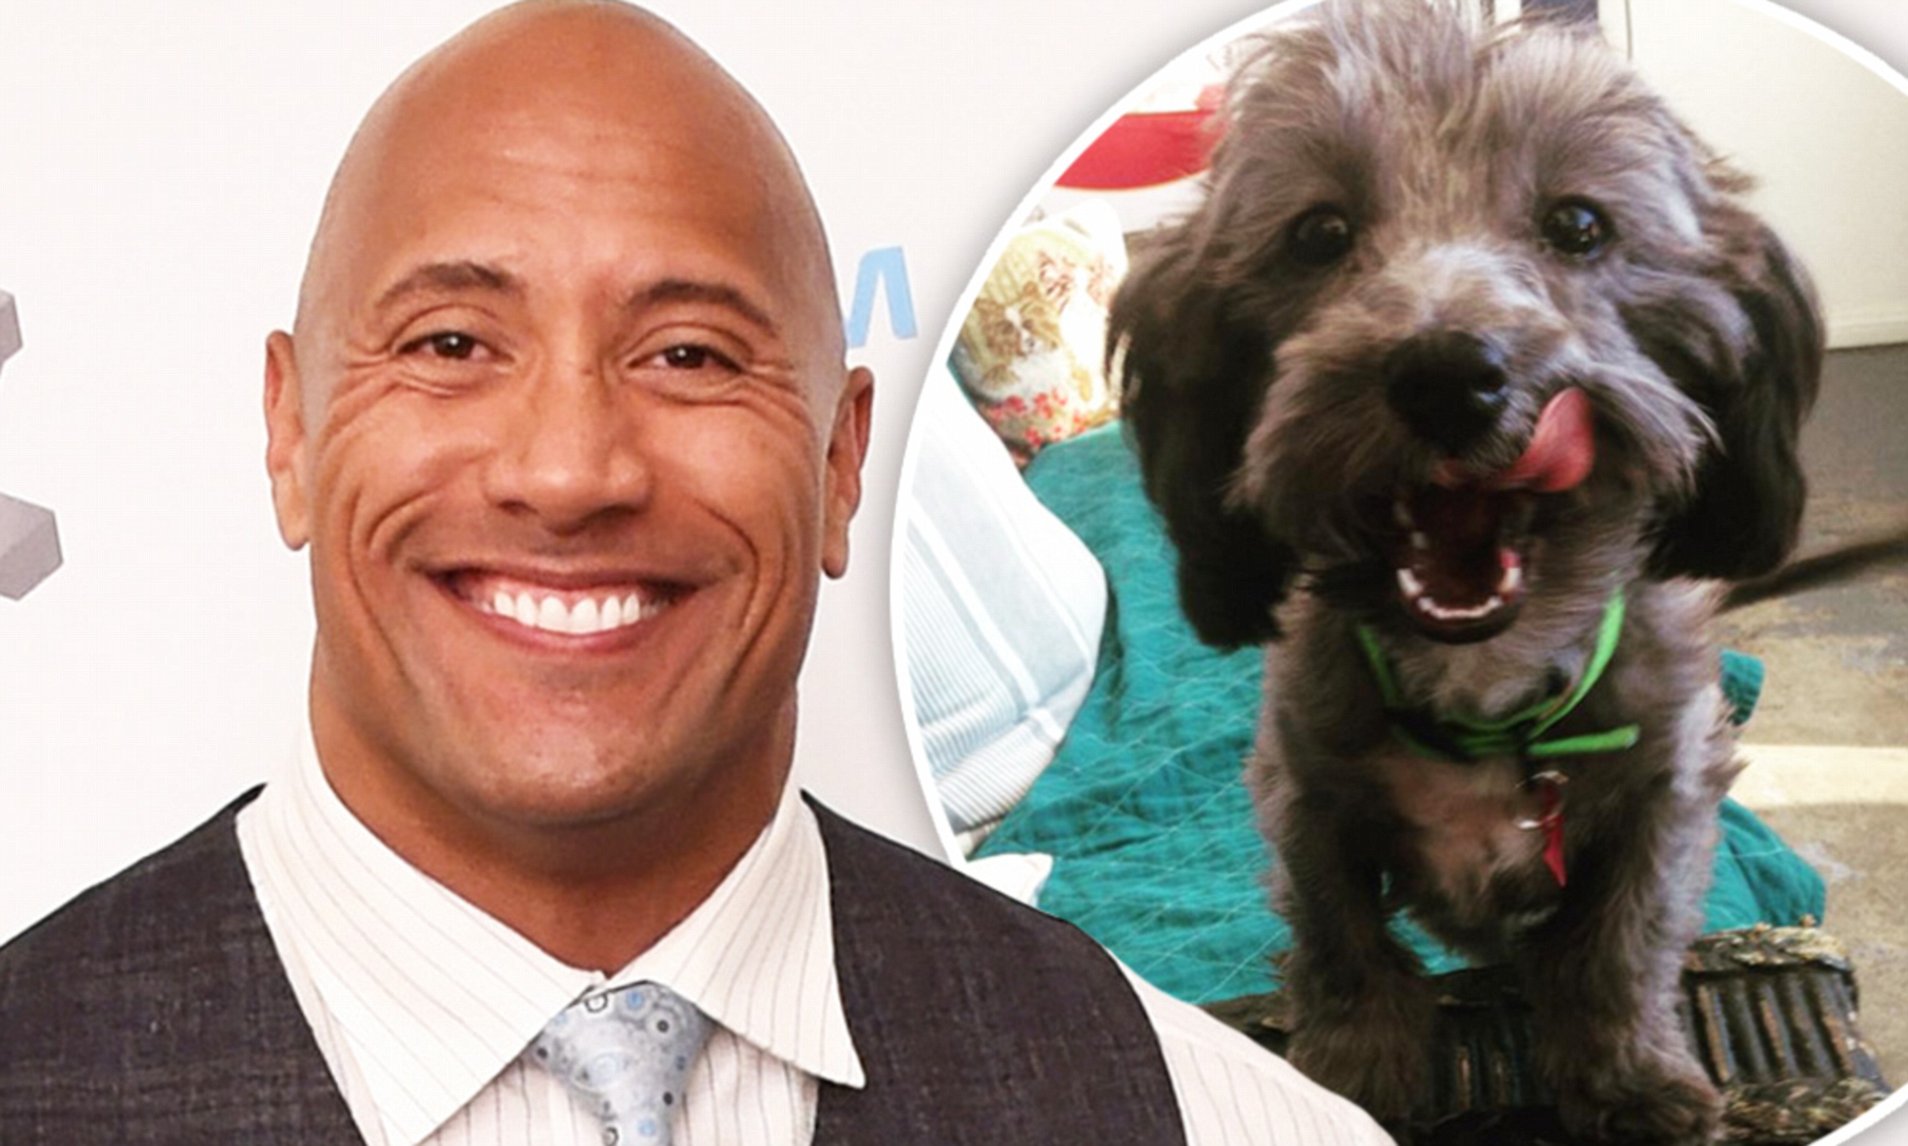 Dwayne 'The Rock' Johnson donates $1,500 for surgery for puppy named after  him | Daily Mail Online